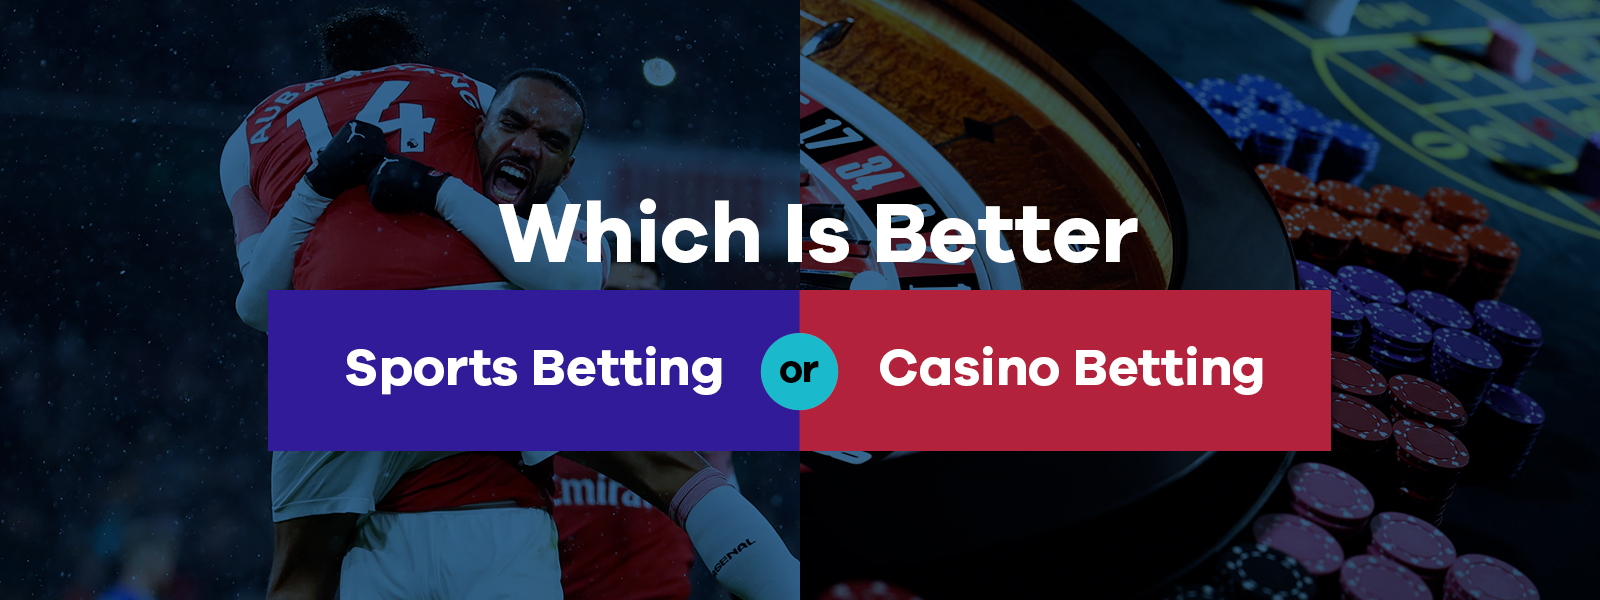 Which Is Better? Sports Betting or Casino Betting?